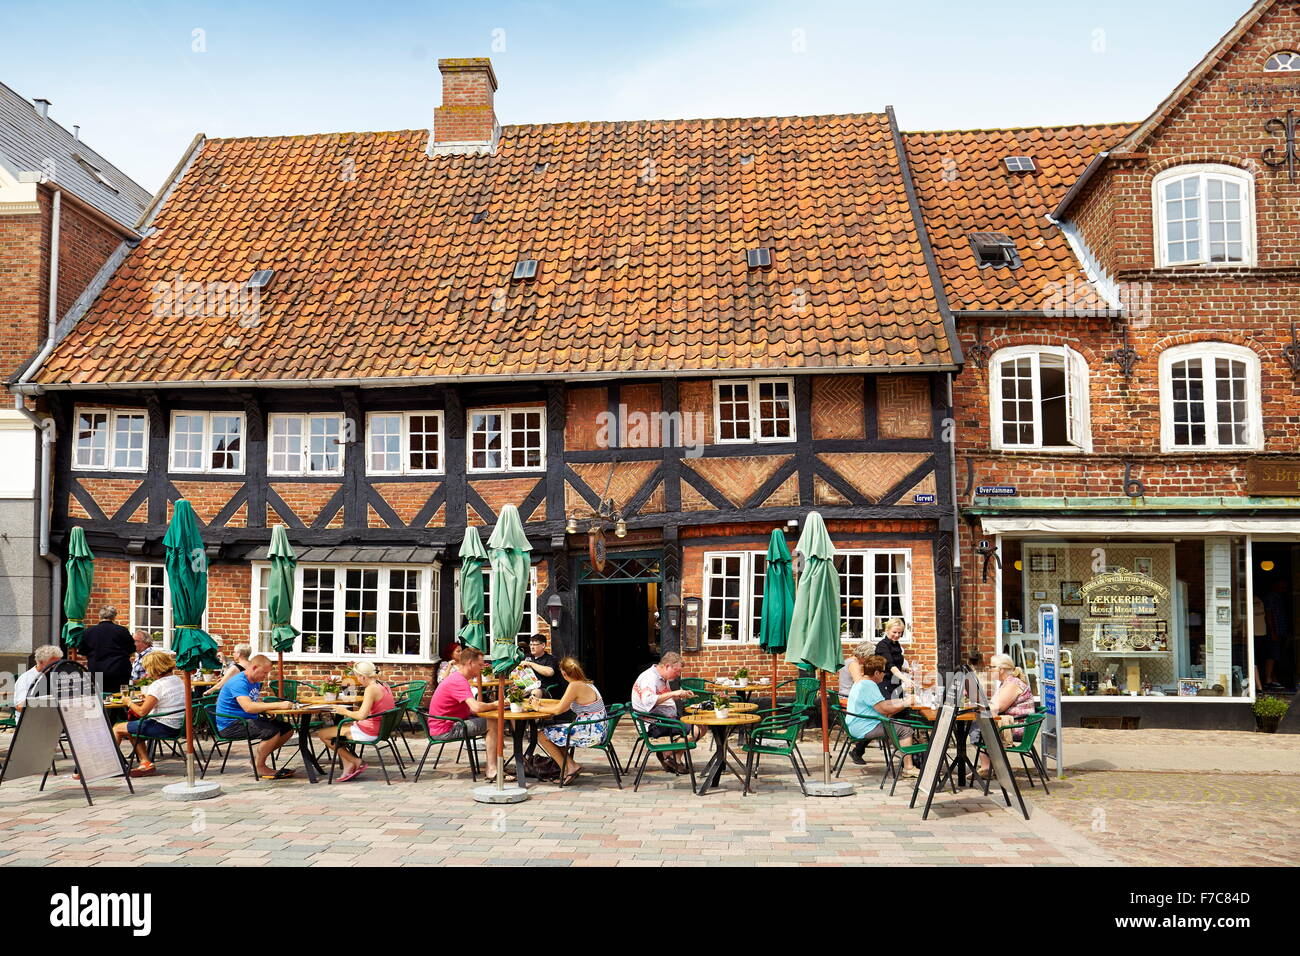 Half-timbered house, Old Town, Ribe, Denmark Stock Photo